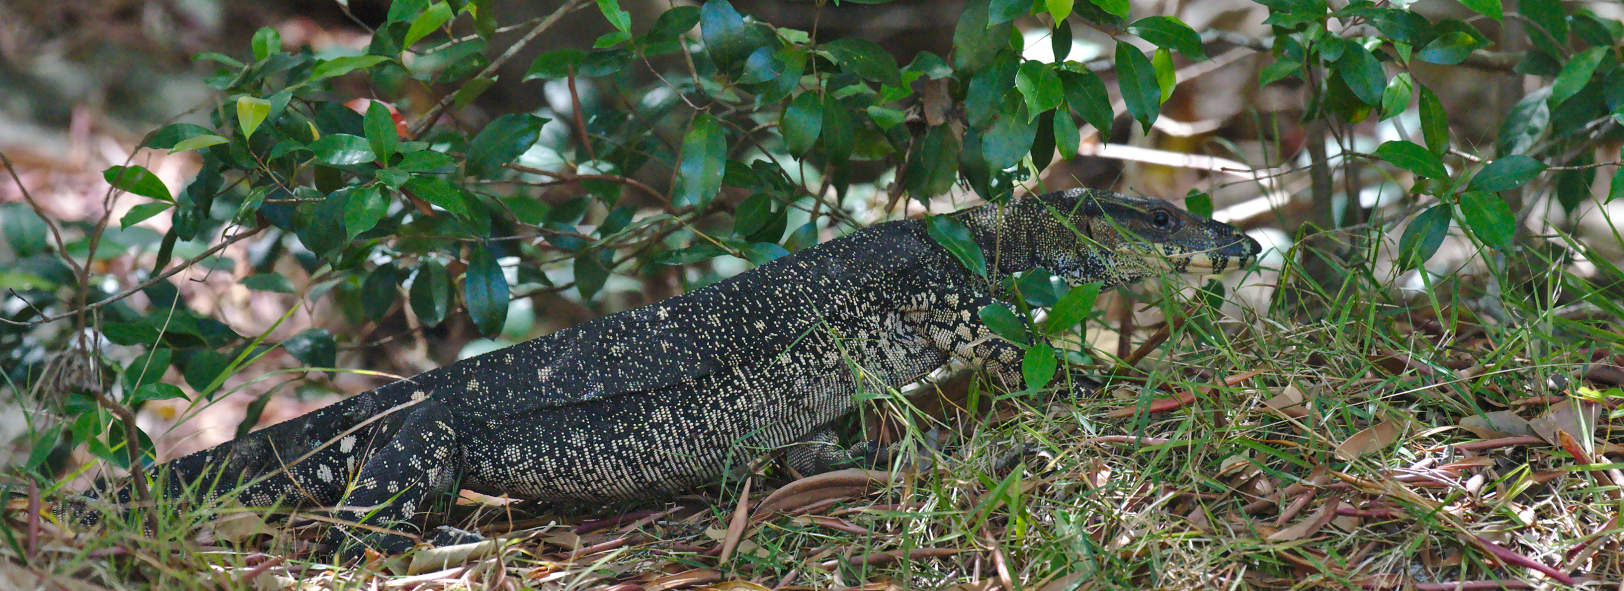 Lace monitor at the campsite